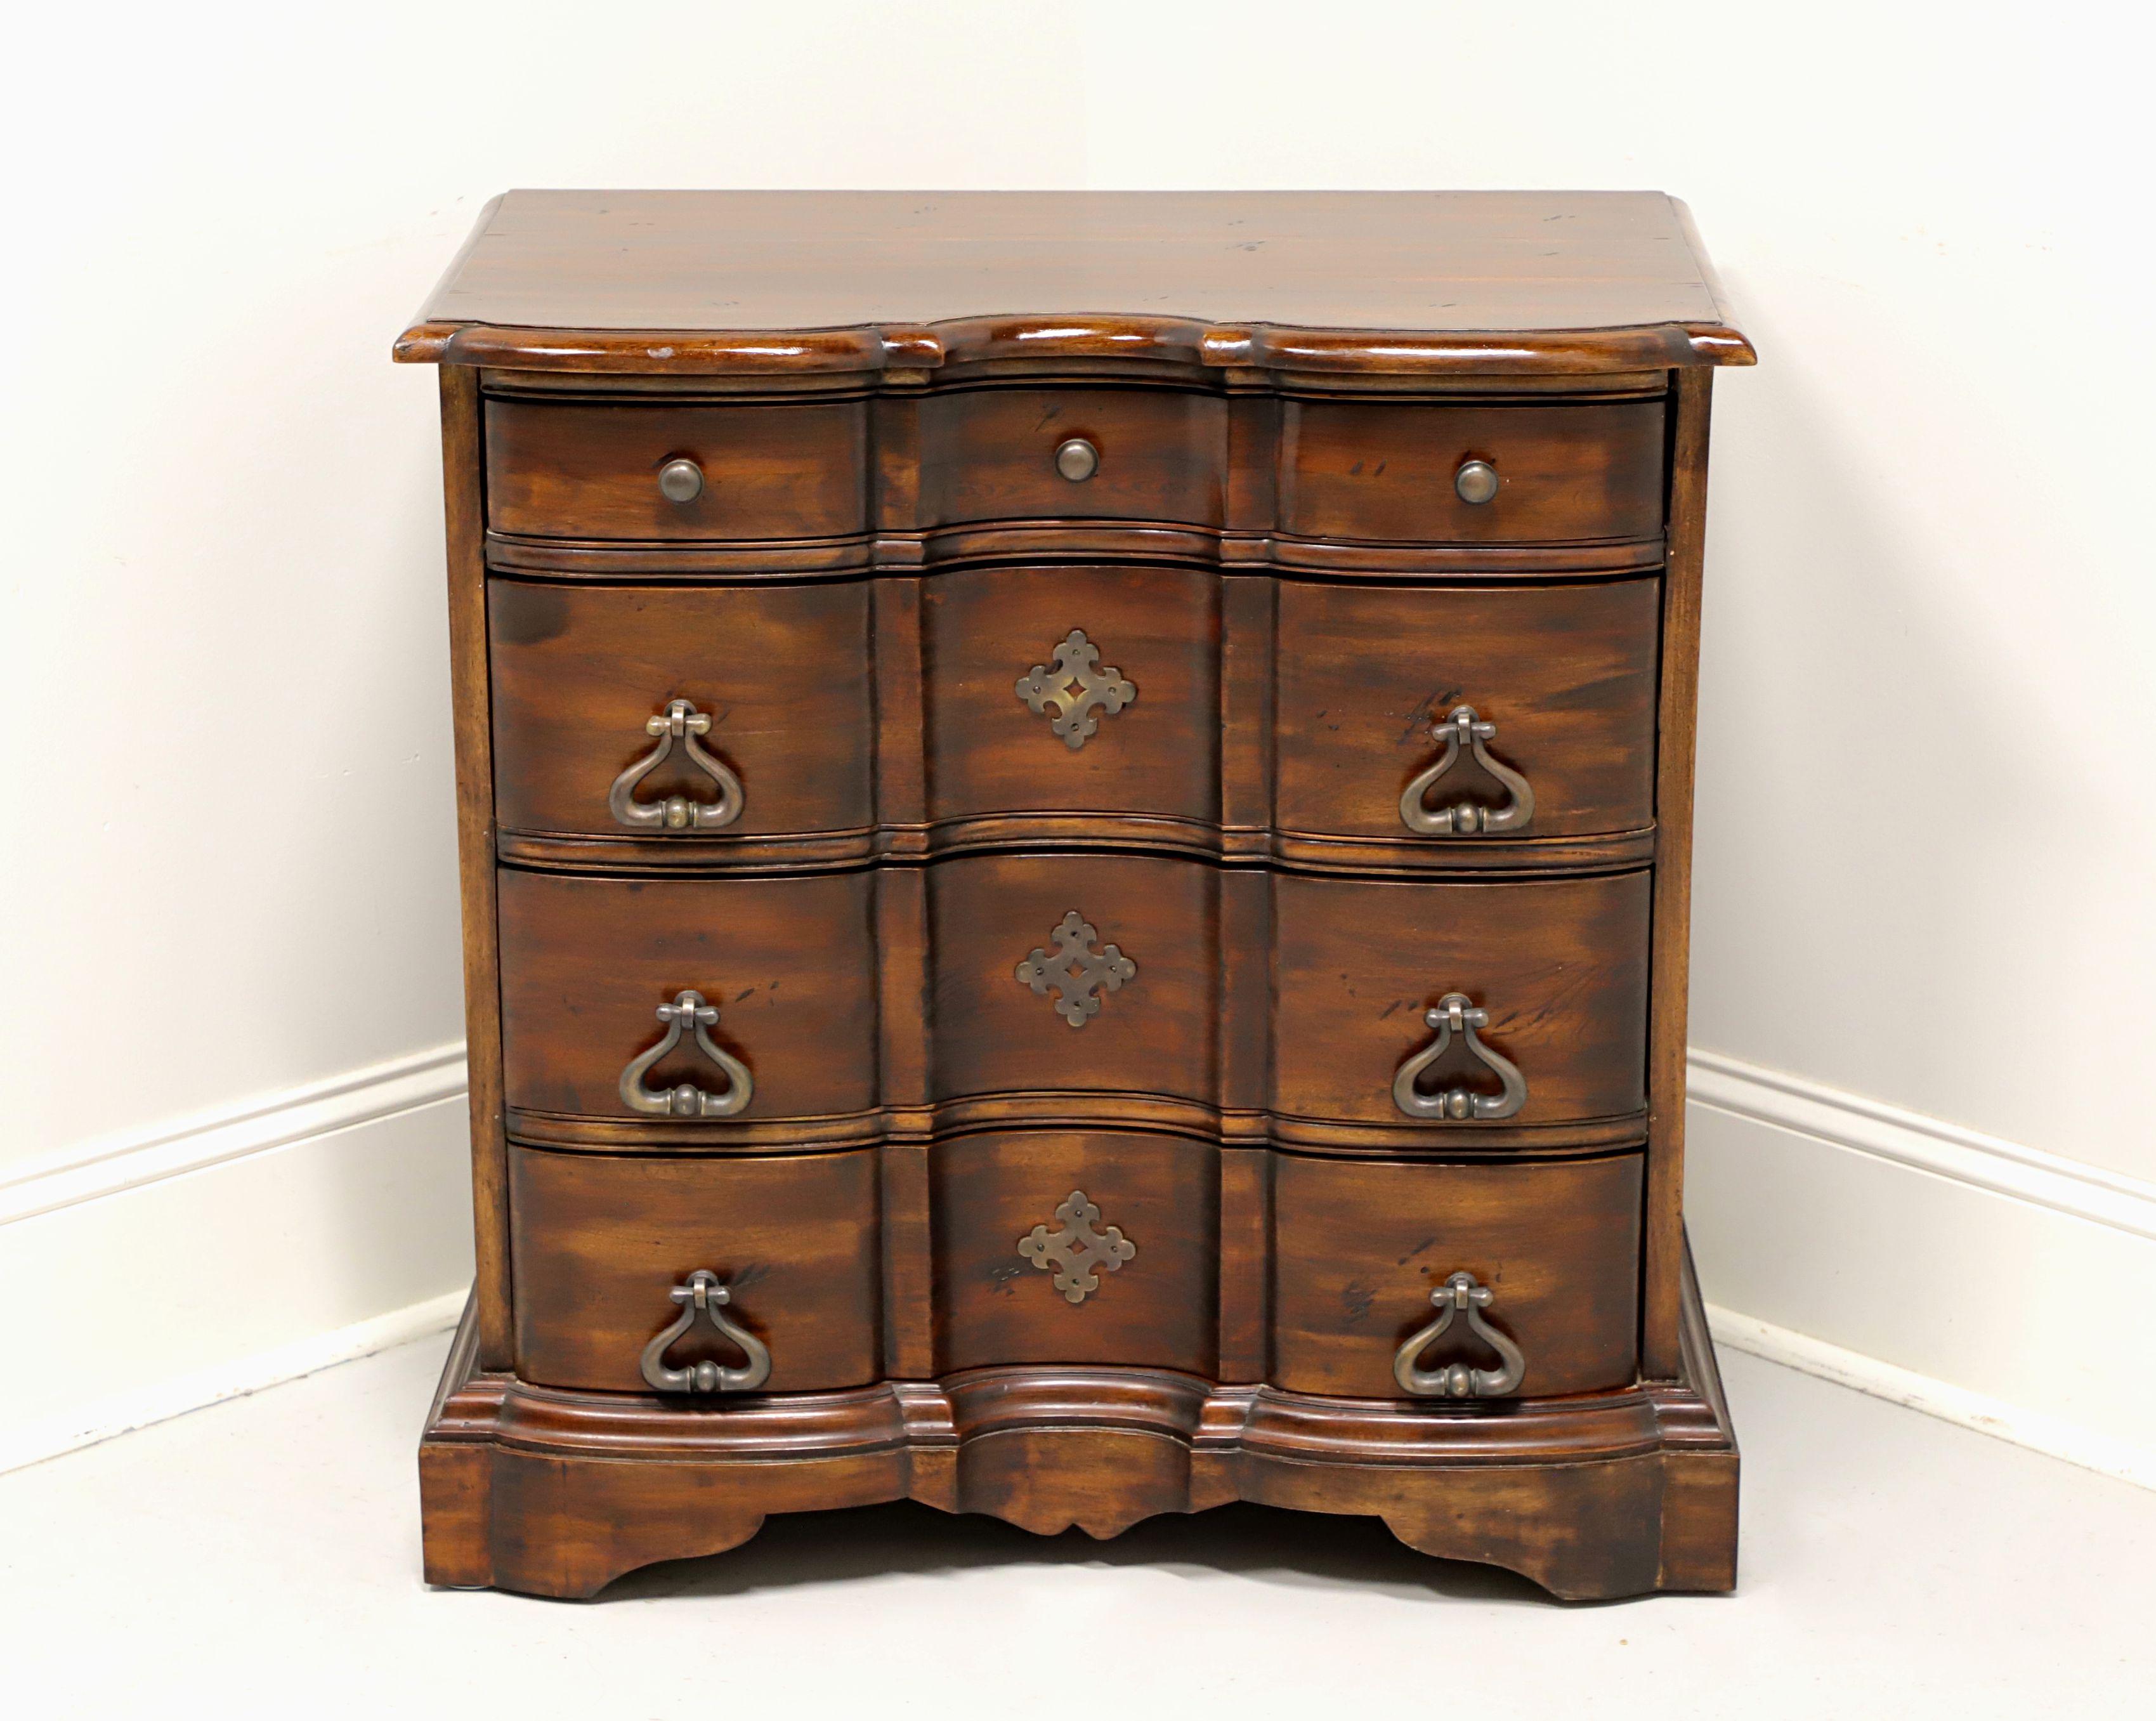 A Chippendale style bedside chest by Furniture Classics, of Norfolk, Virginia, USA. Mahogany with slightly distressed finish, brass hardware, serpentine shape, carved apron and bracket feet. Features four dovetail drawers with decorative brass